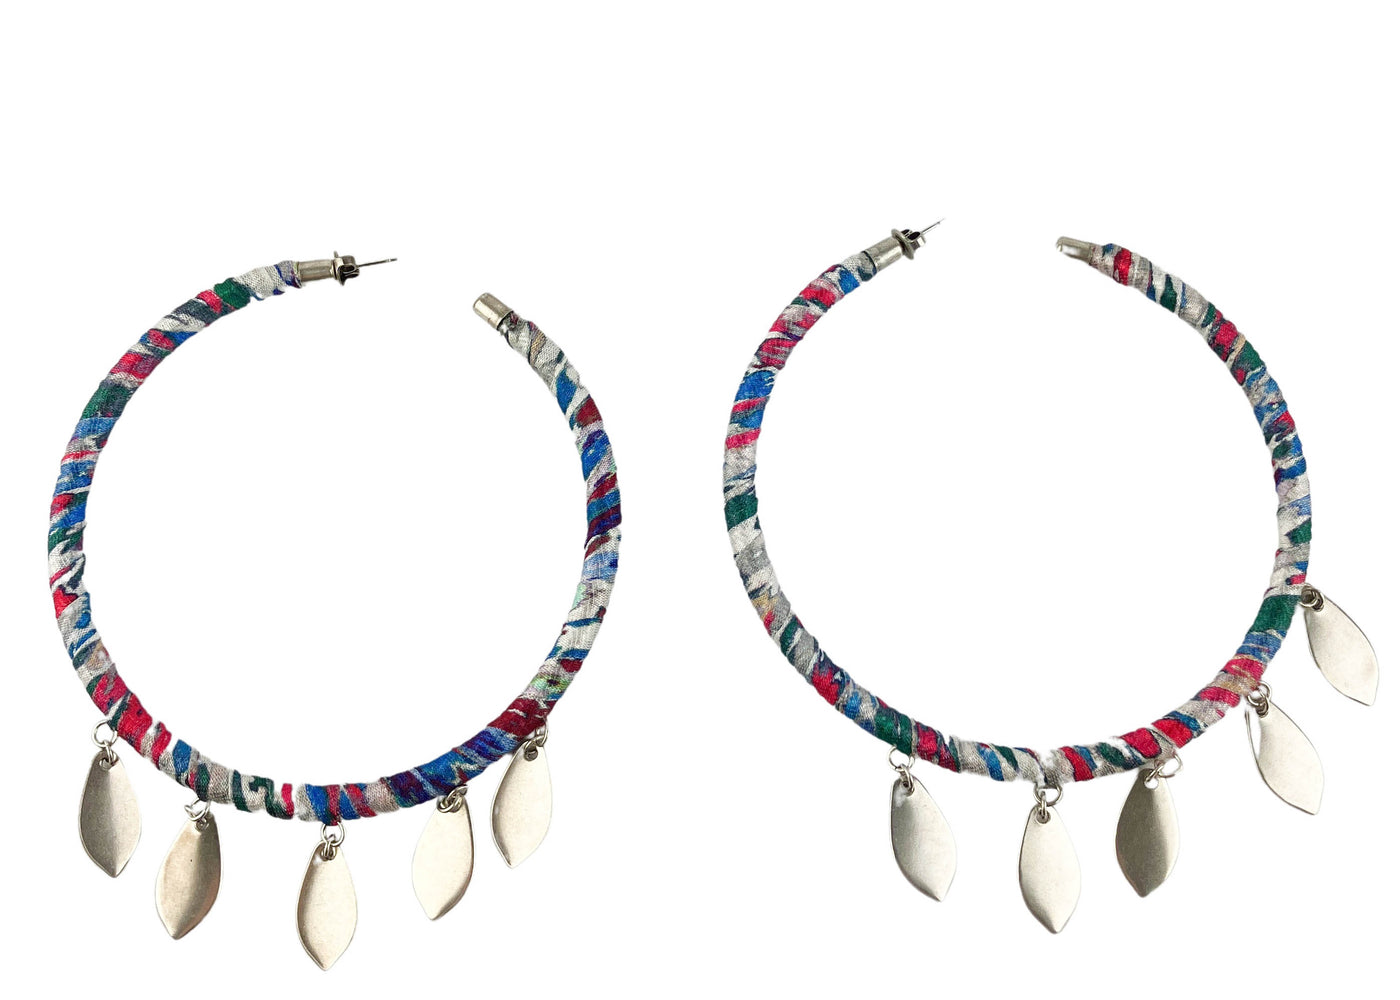 Isabel Marant Satin Wrapped Large Hoop Earrings in Blue/Pink - Discounts on Isabel Marant at UAL